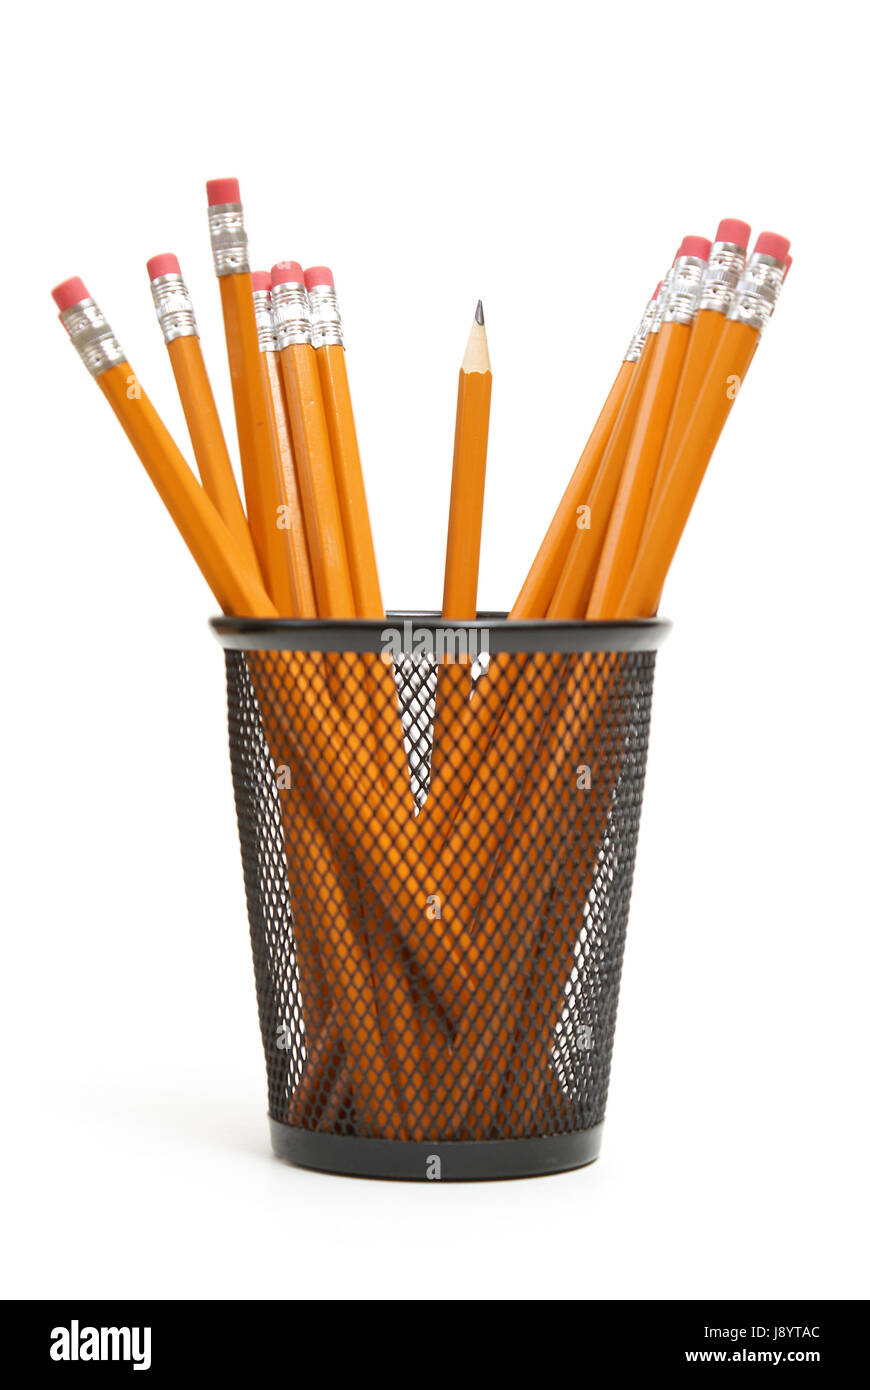 Steel Mesh Brush Pot And Pencils Stock Photo, Picture and Royalty Free  Image. Image 13253038.